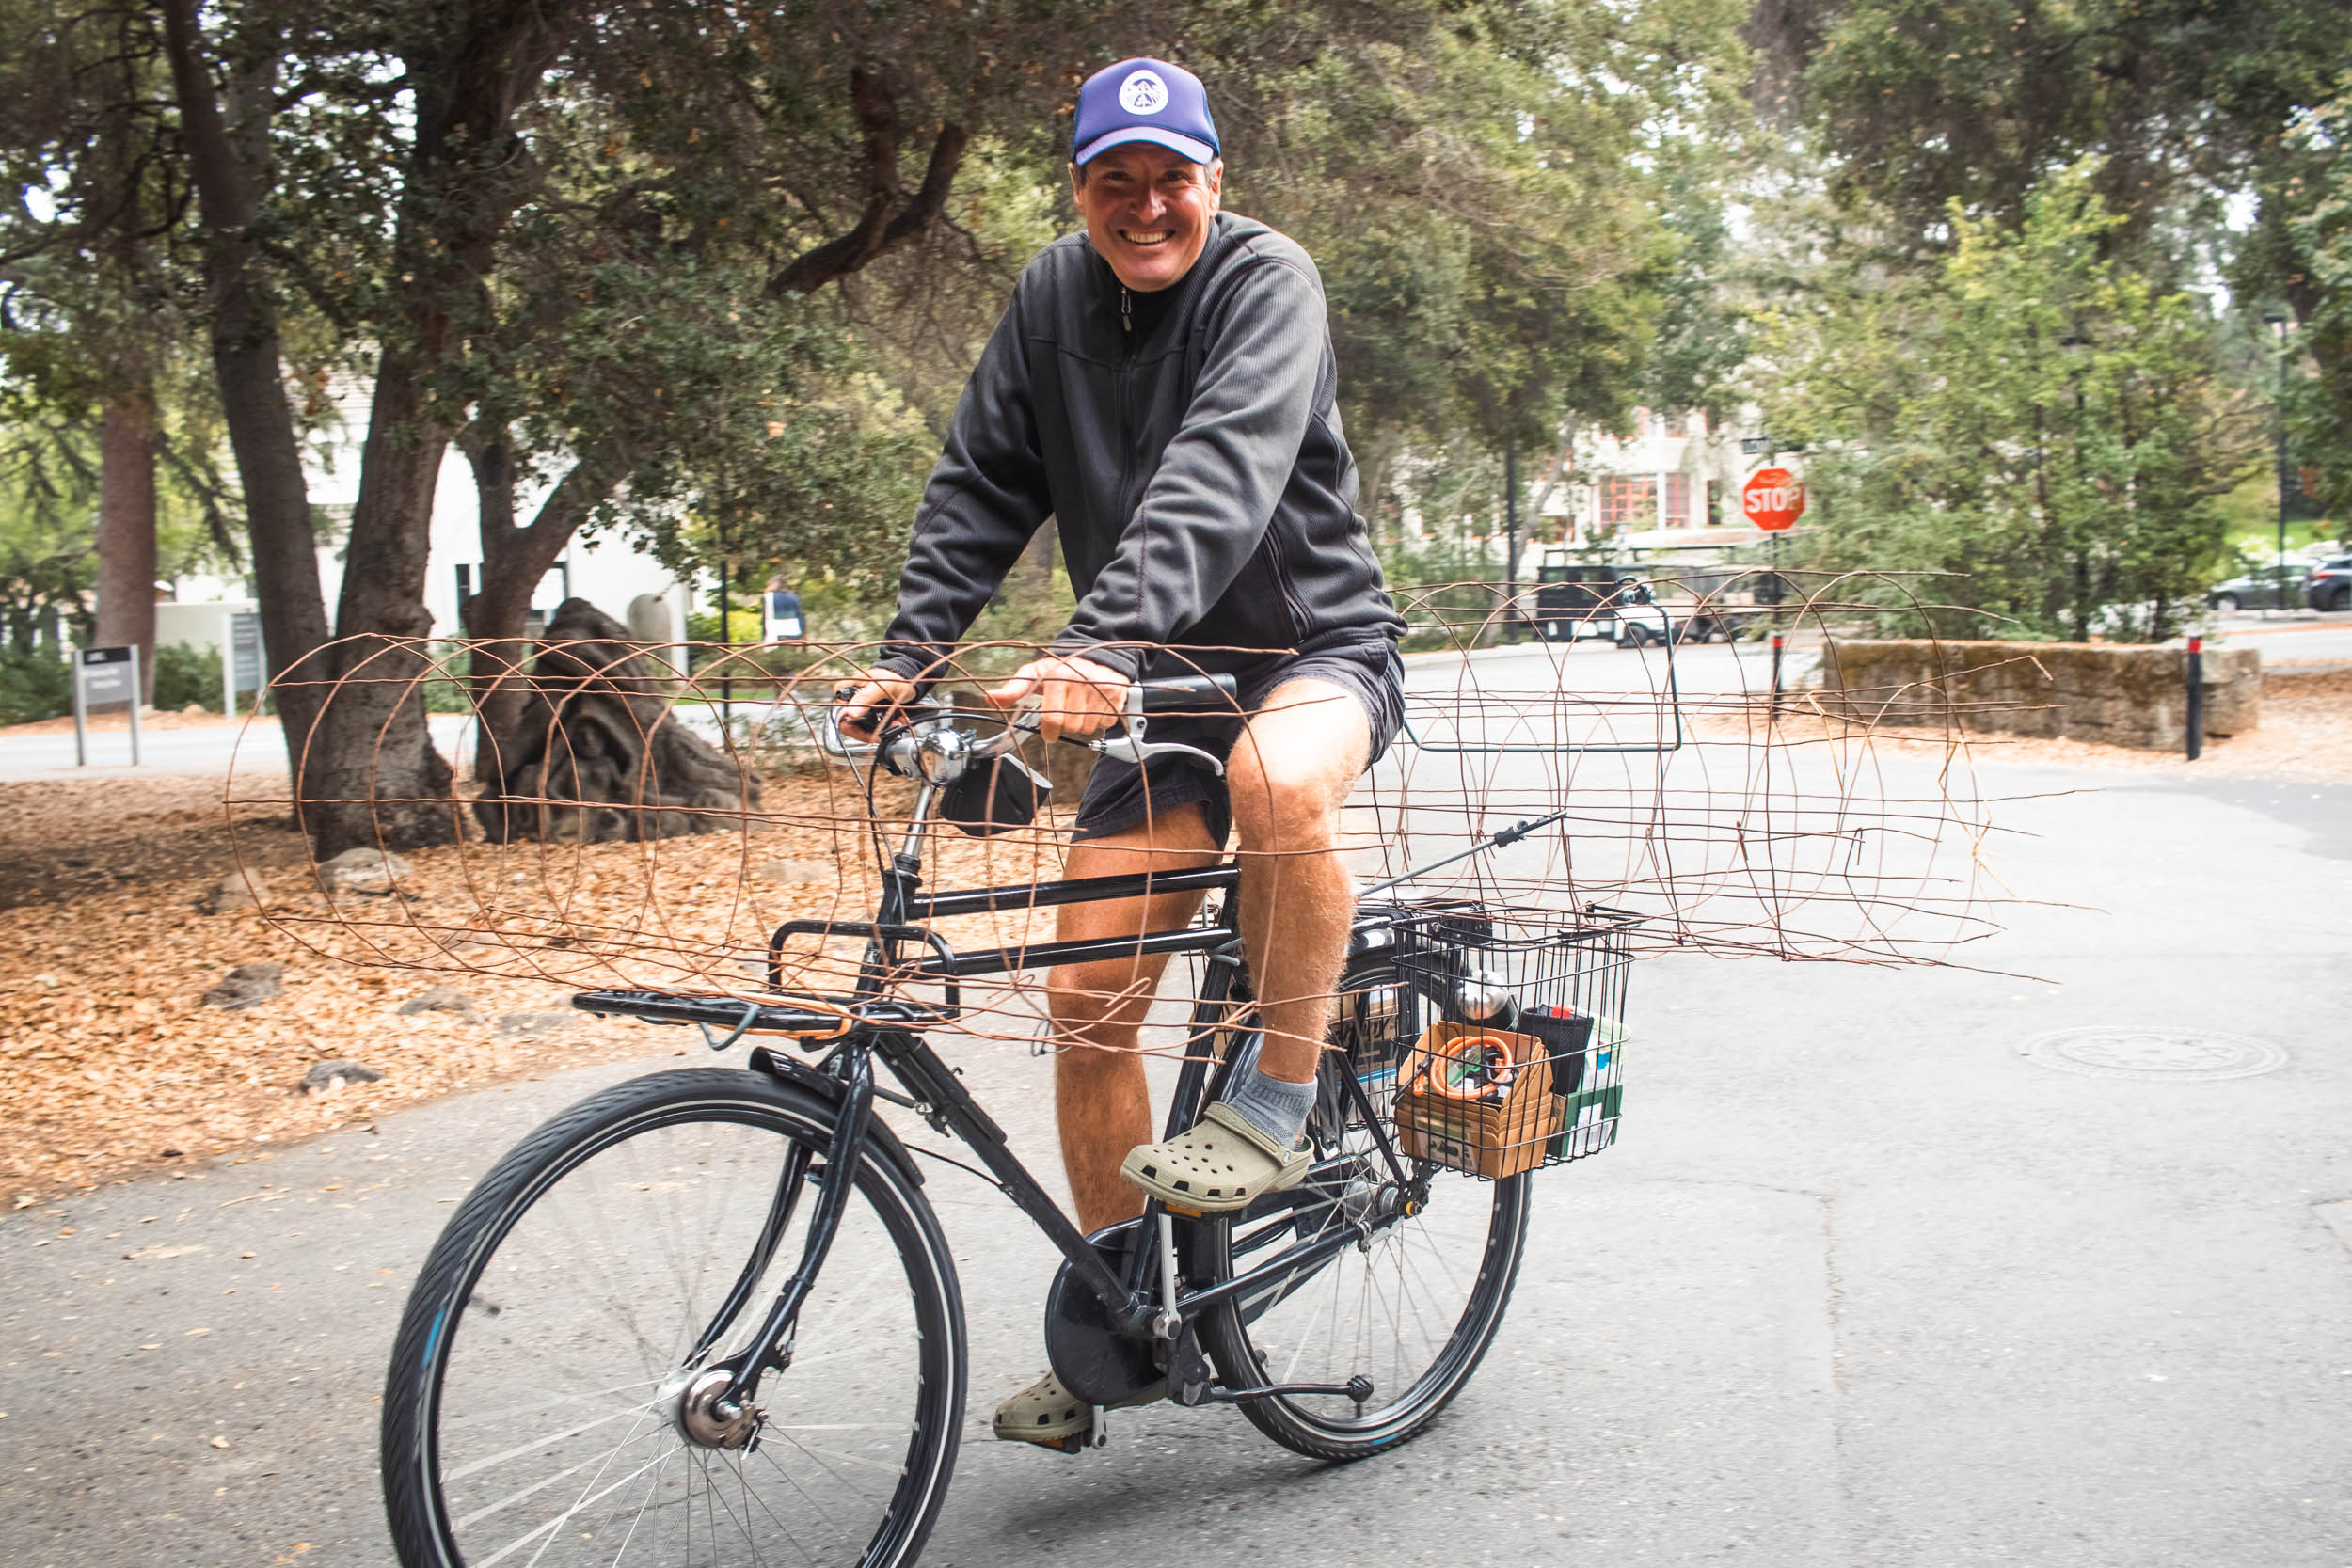 Conrad rides his bike through campus with large tomato trellises hanging off the back.